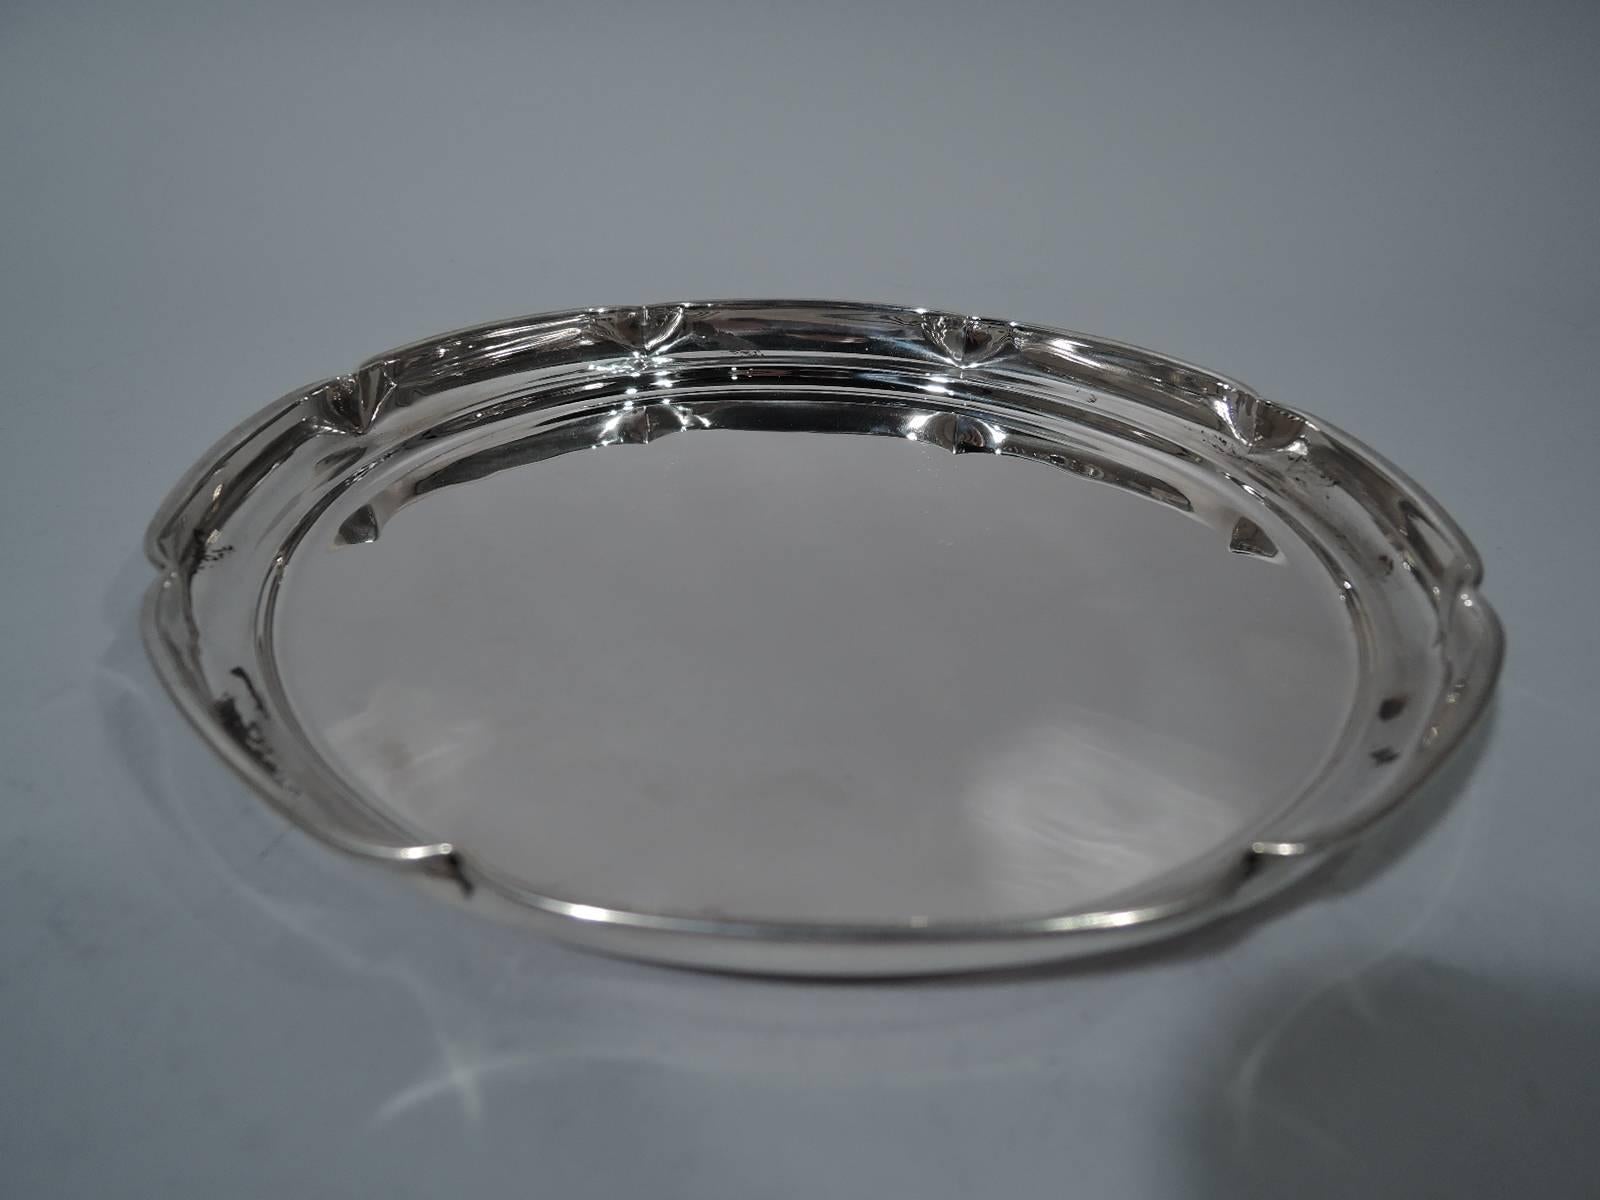 Sterling silver serving tray. Retailed by Cartier in New York, circa 1940. Circular with curved sides and molded and crimped (or lobed) rim. Hallmark includes no. 45/3. Weight: 6.3 troy ounces.